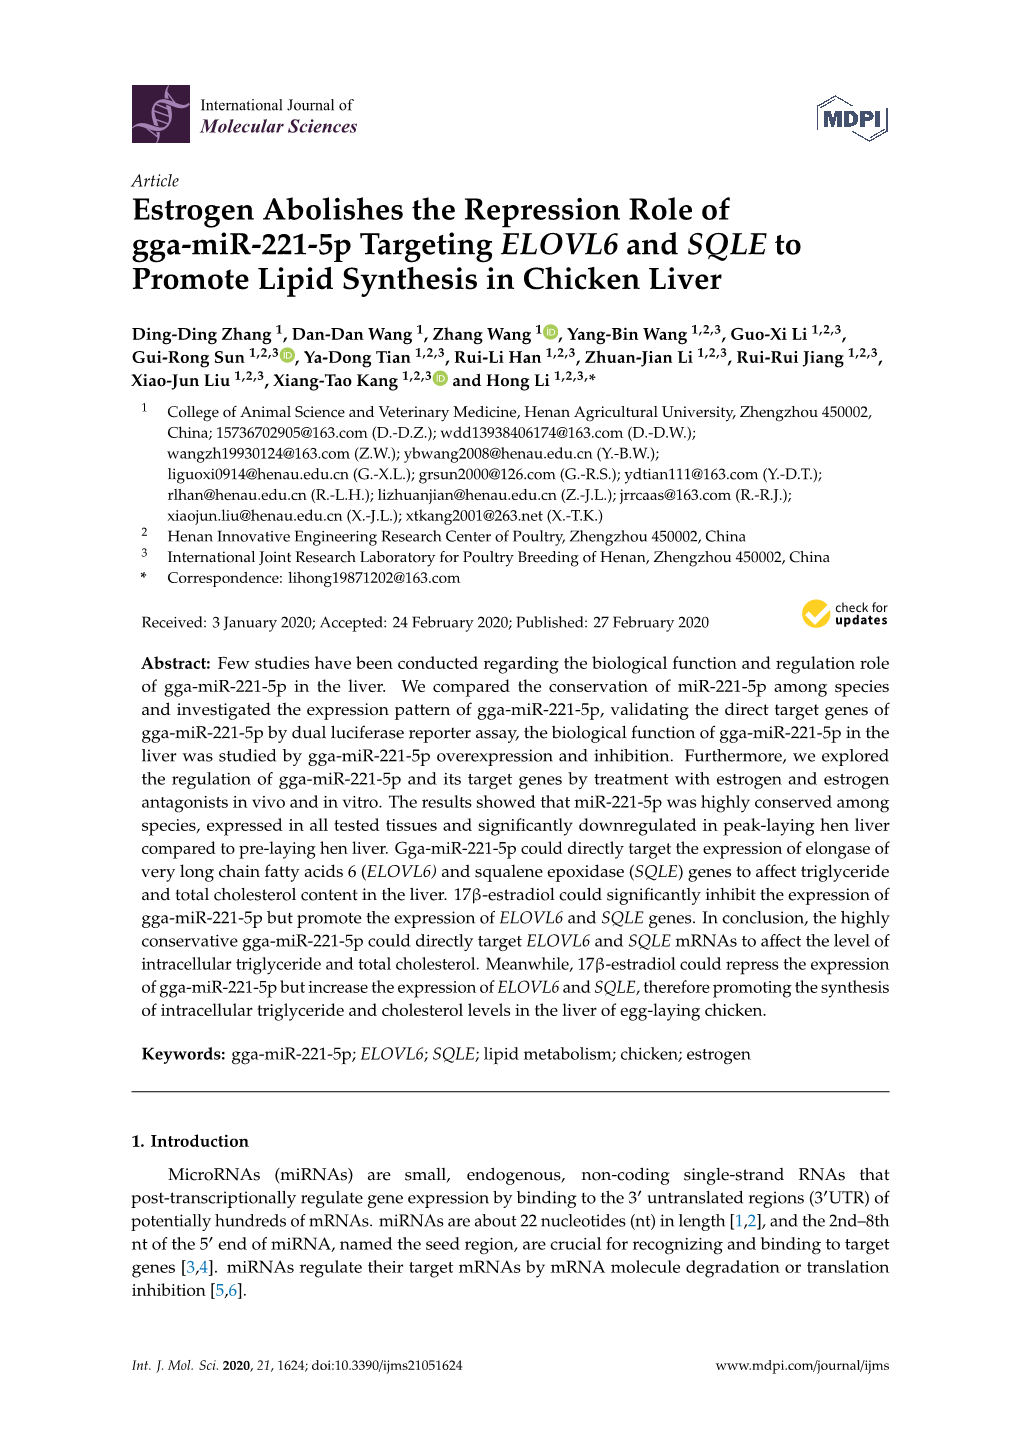 Estrogen Abolishes the Repression Role of Gga-Mir-221-5P Targeting ELOVL6 and SQLE to Promote Lipid Synthesis in Chicken Liver